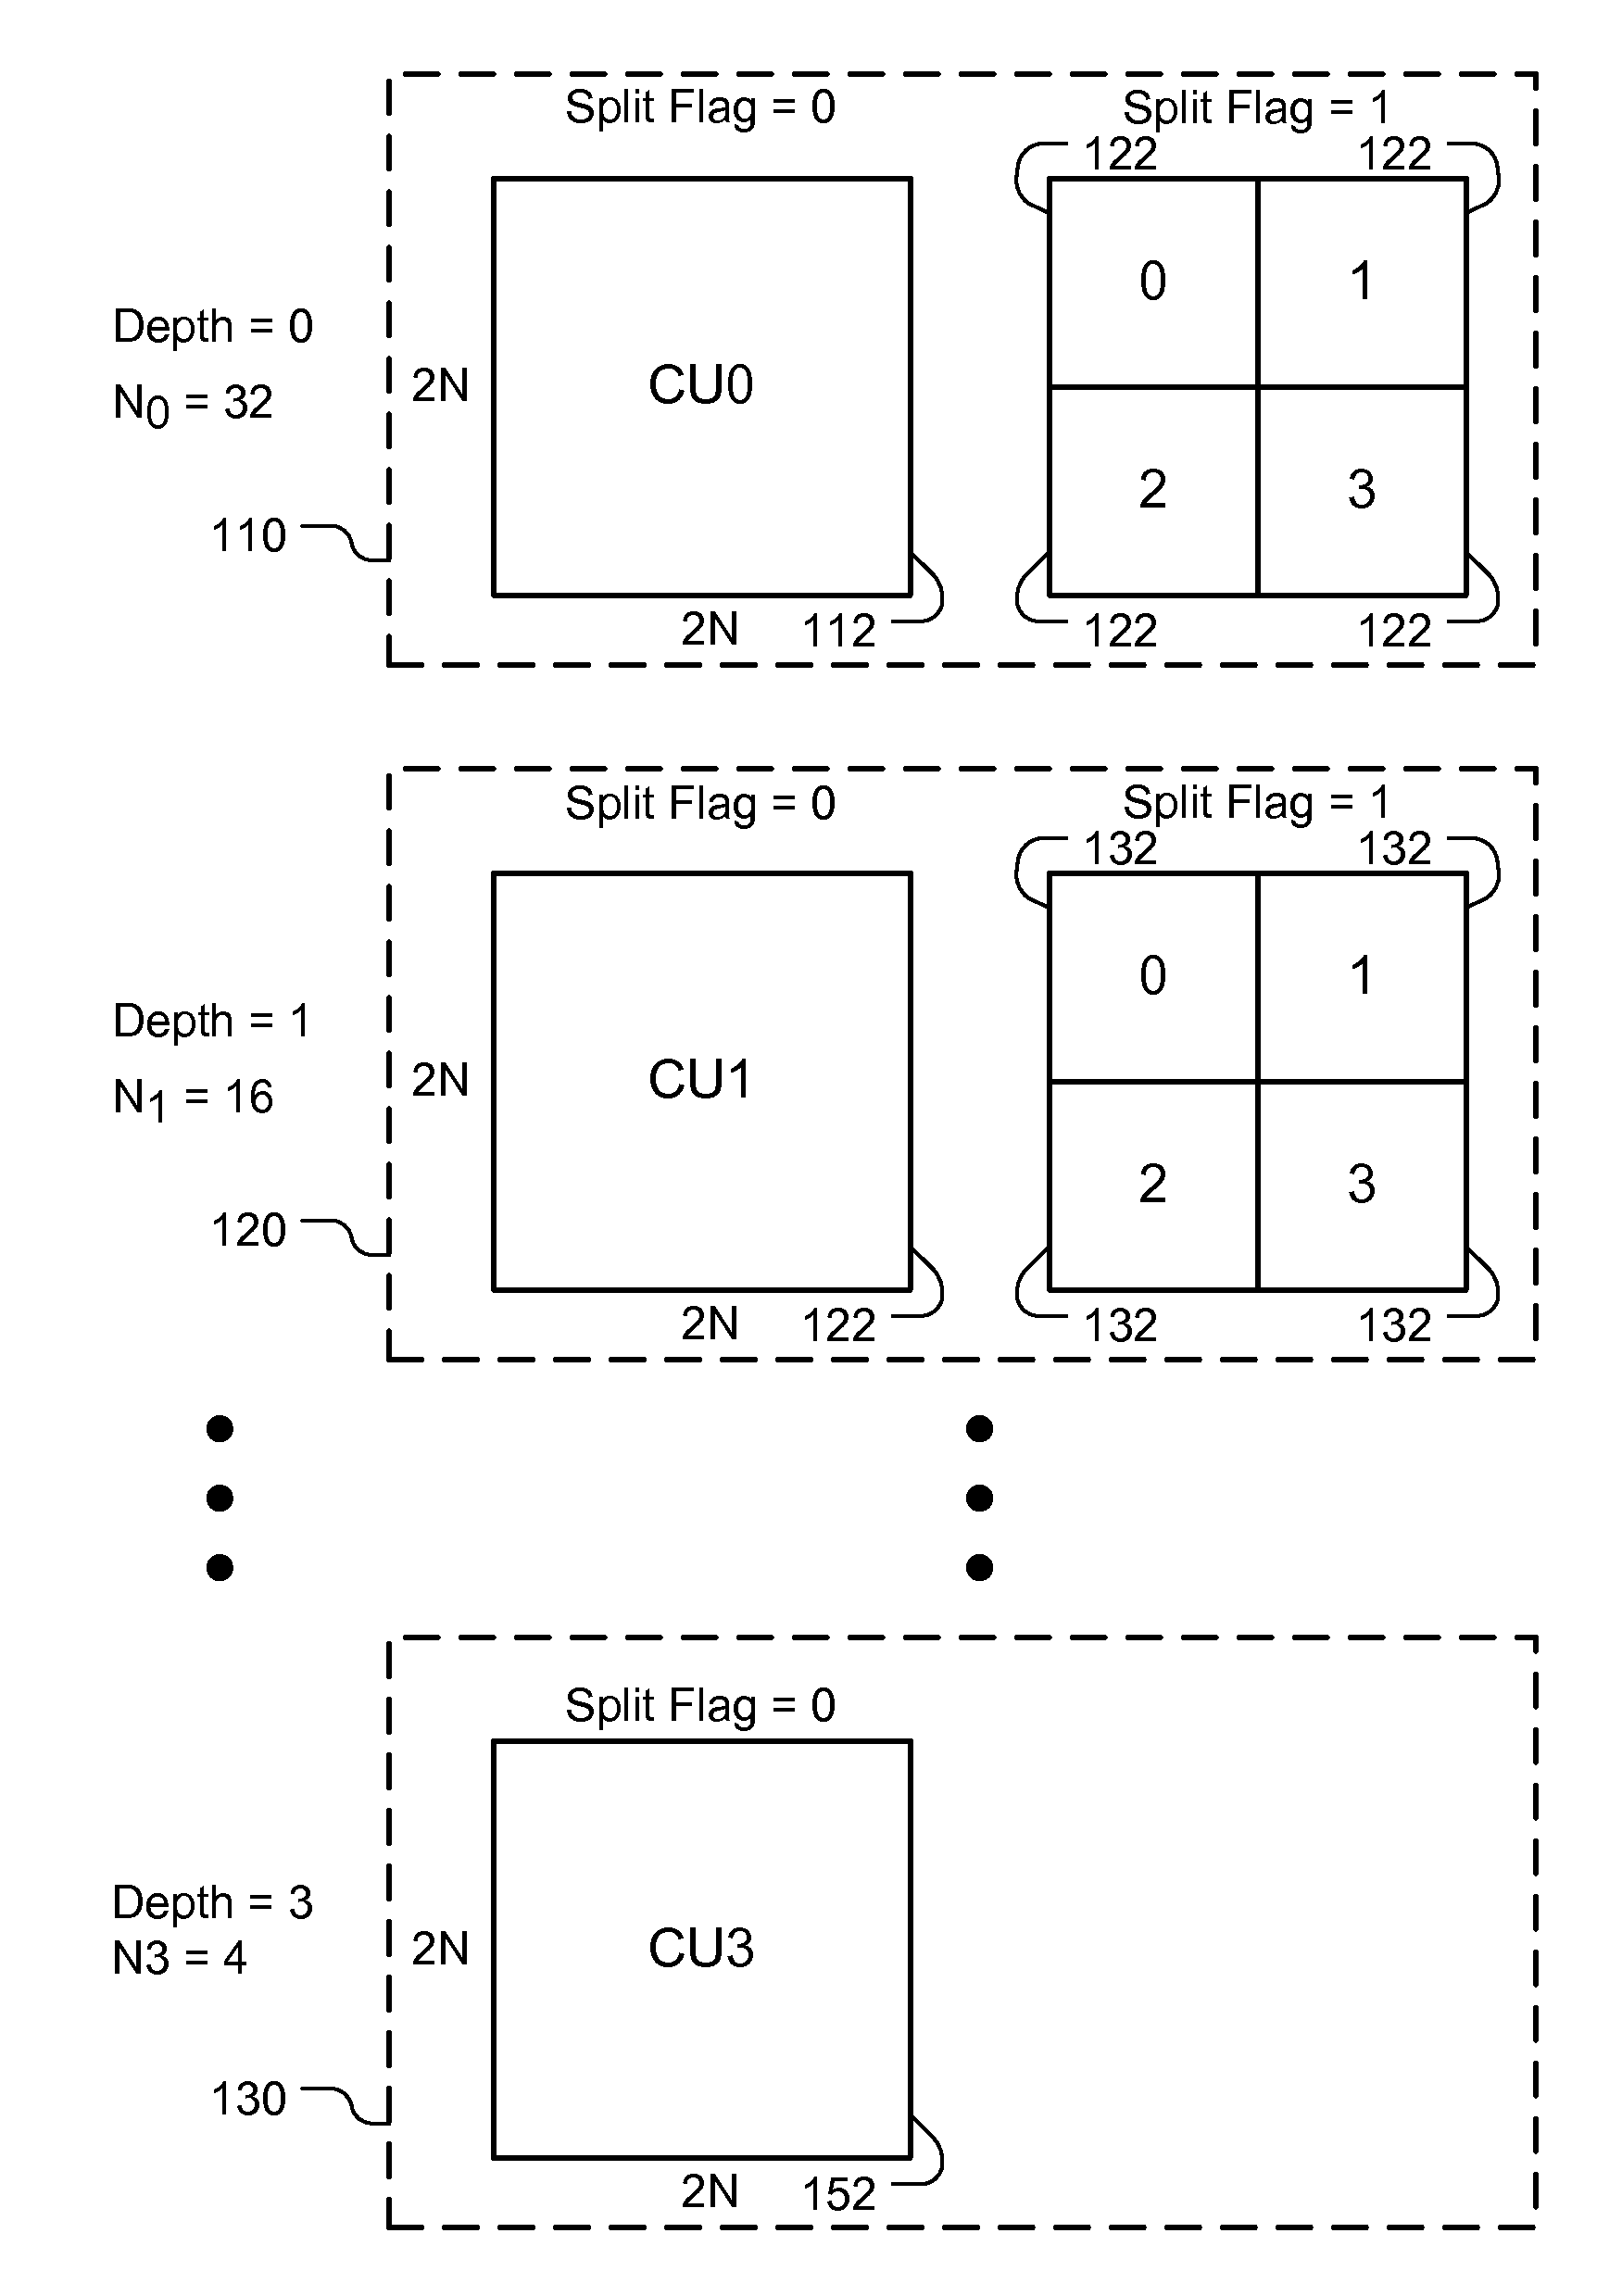 Apparatus and Method for High Efficiency Video Coding Using Flexible Slice Structure